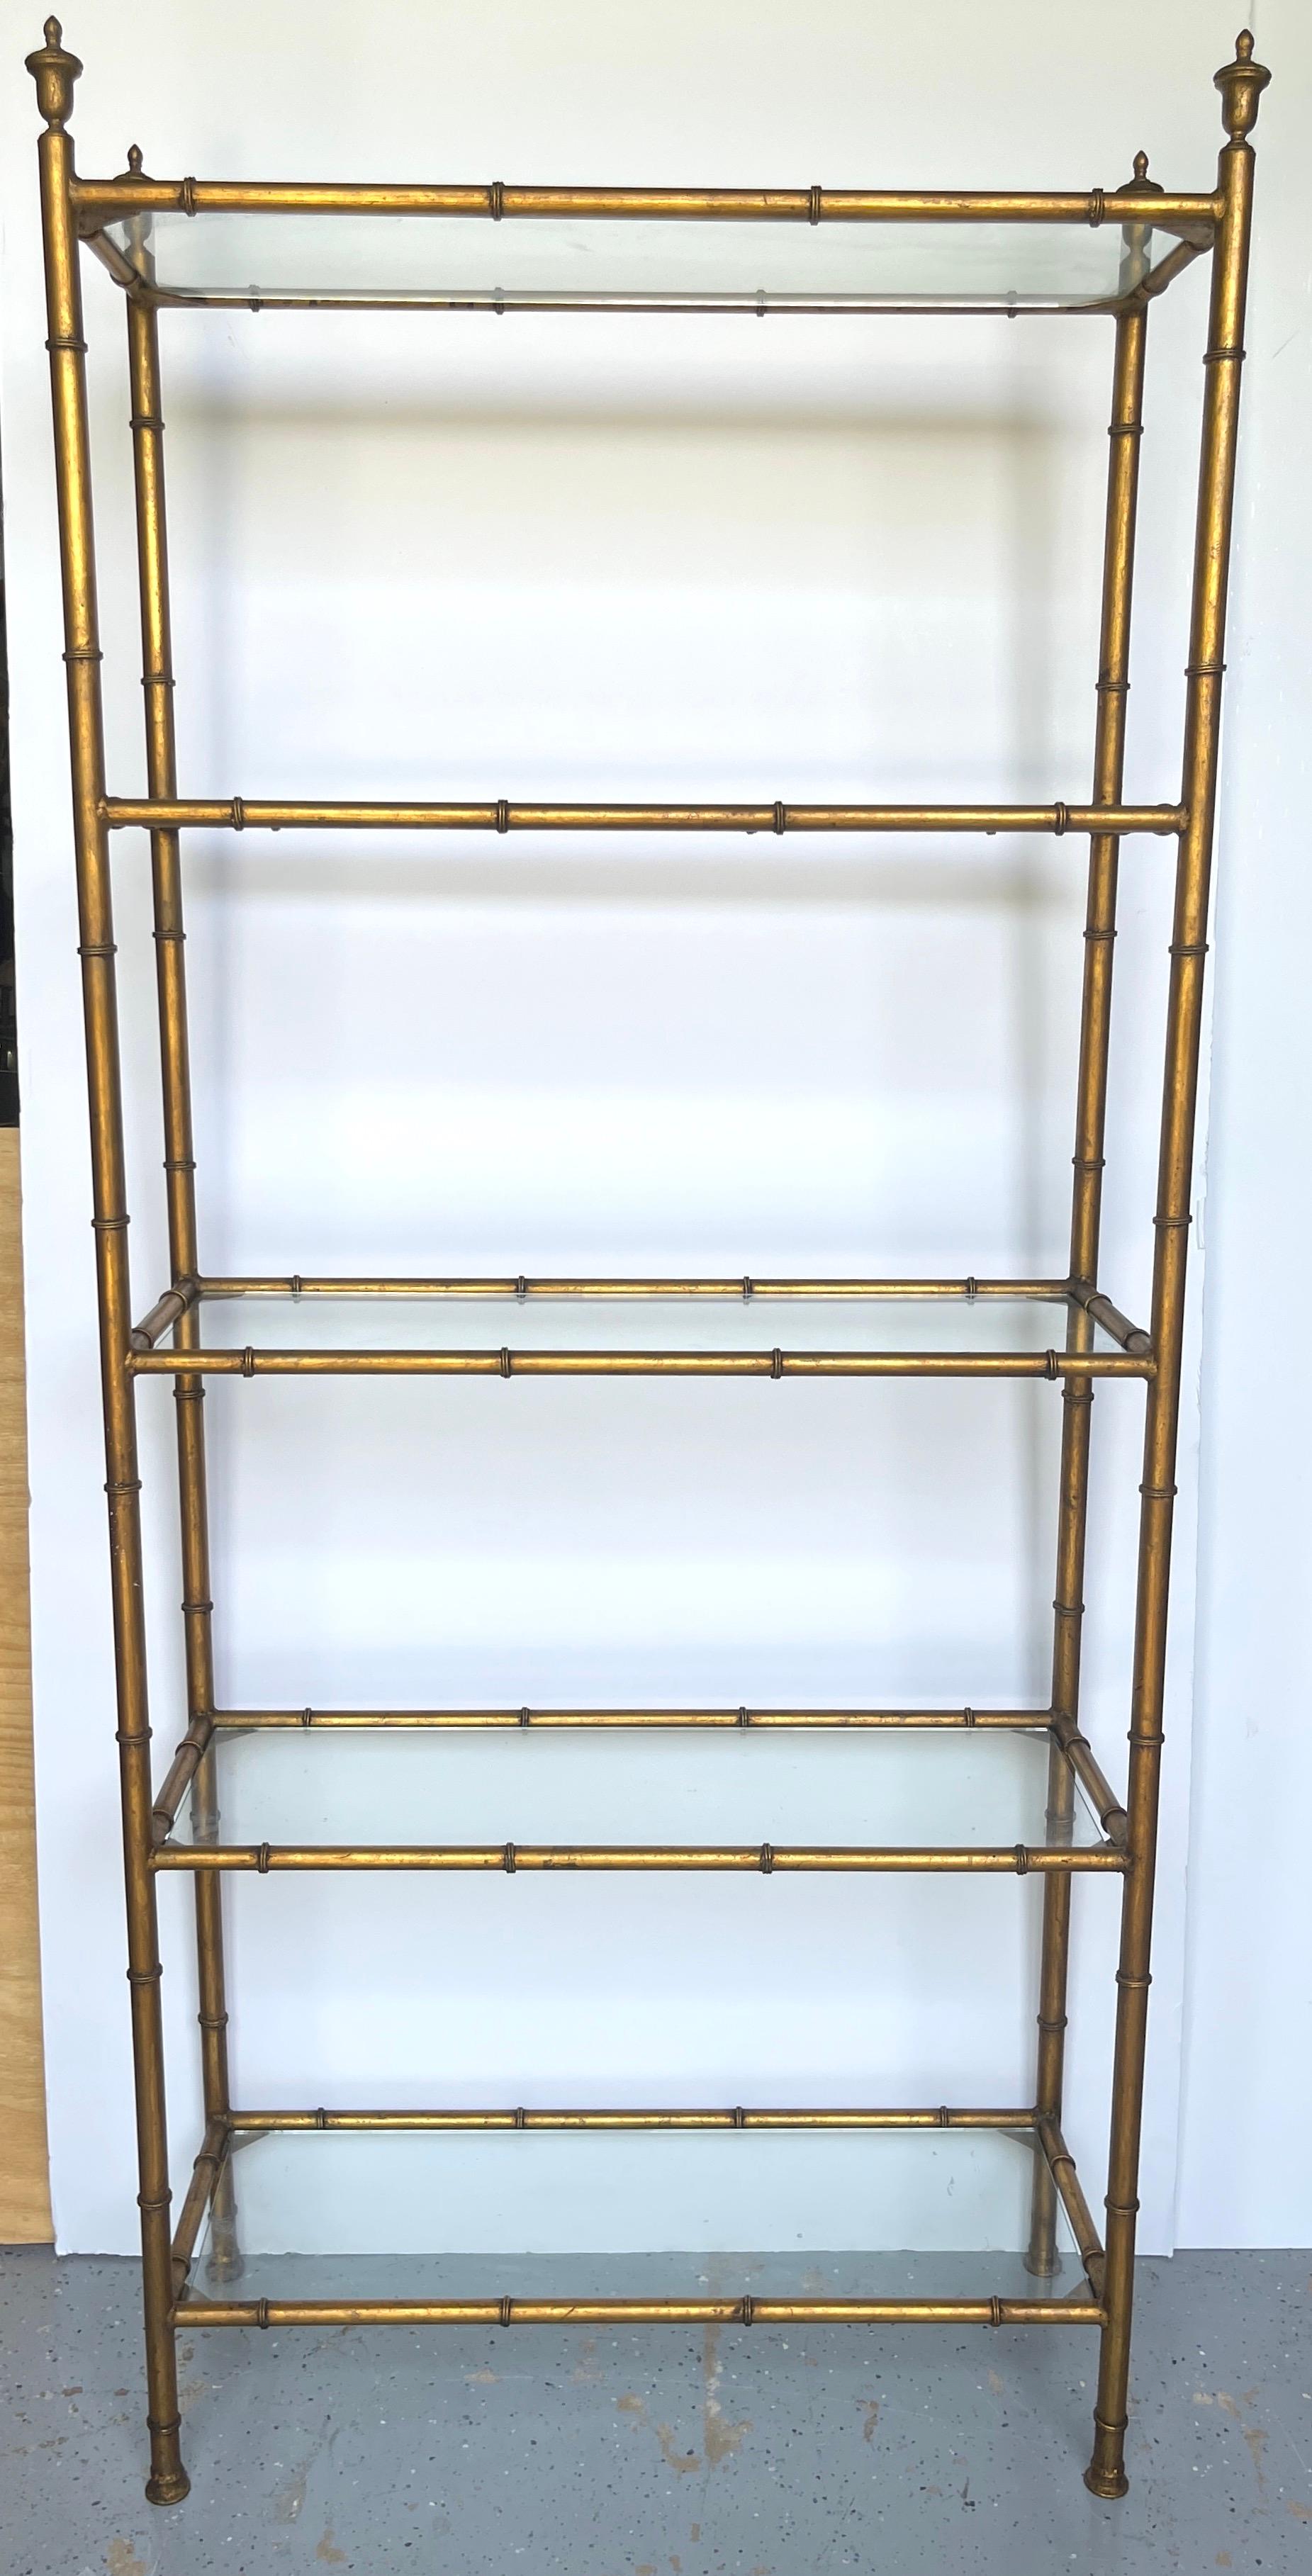 Italian Neoclassical Gilt Faux Bamboo 5-Tier Etagere with Urn Finials, C. 1960s

Experience 1960s Italian Neoclassical elegance with this striking gilt faux bamboo 5-tier etagere adorned with  urn finials, dating back to the 1960s. Standing tall and